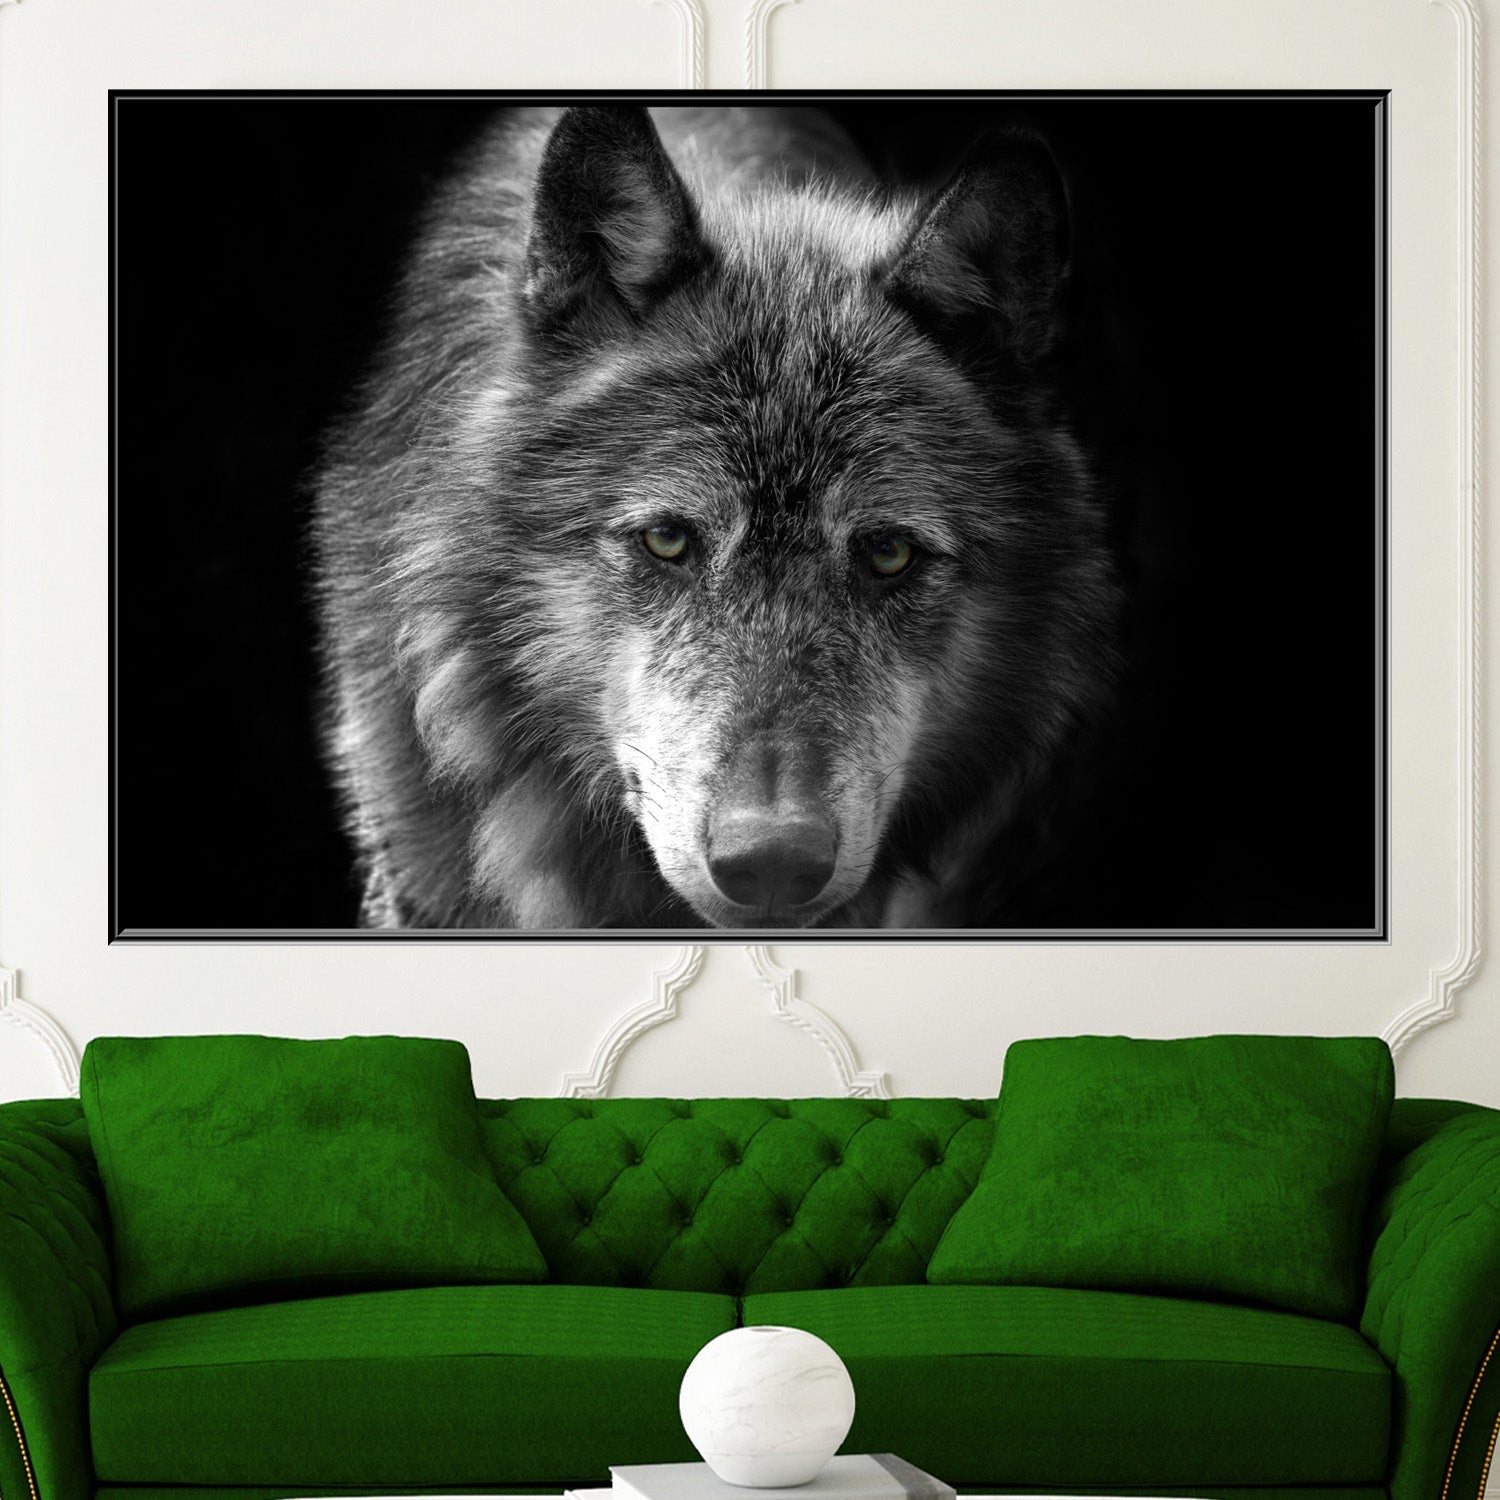 https://cdn.shopify.com/s/files/1/0387/9986/8044/products/IberianWolfCanvasArtprintStretched-1.jpg